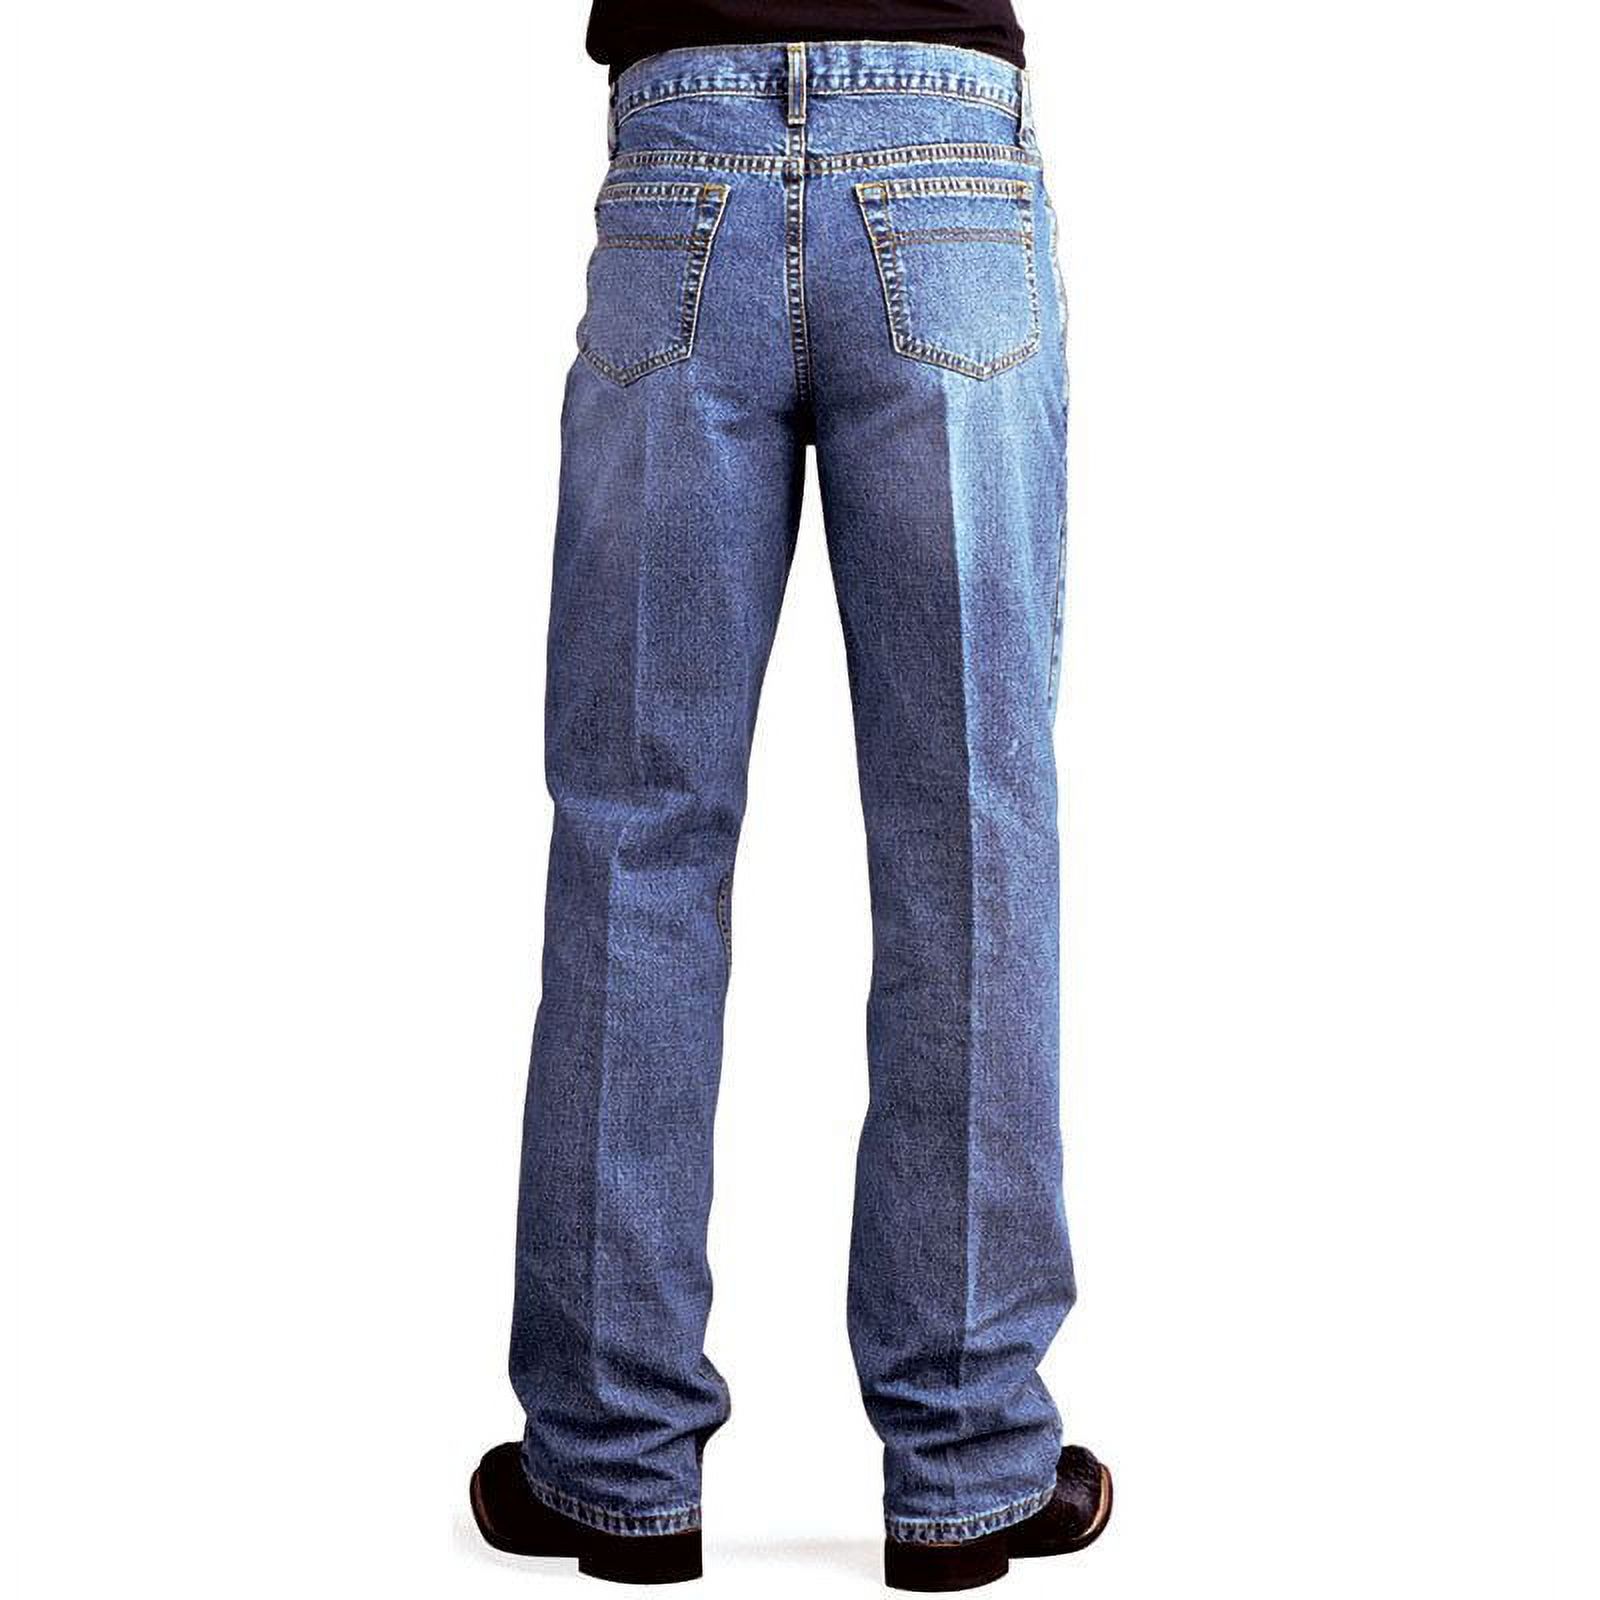 Cinch Men's Jeans White Label Relaxed Fit Medium Stonewash Light Stone 36W x 36L  US - image 1 of 4